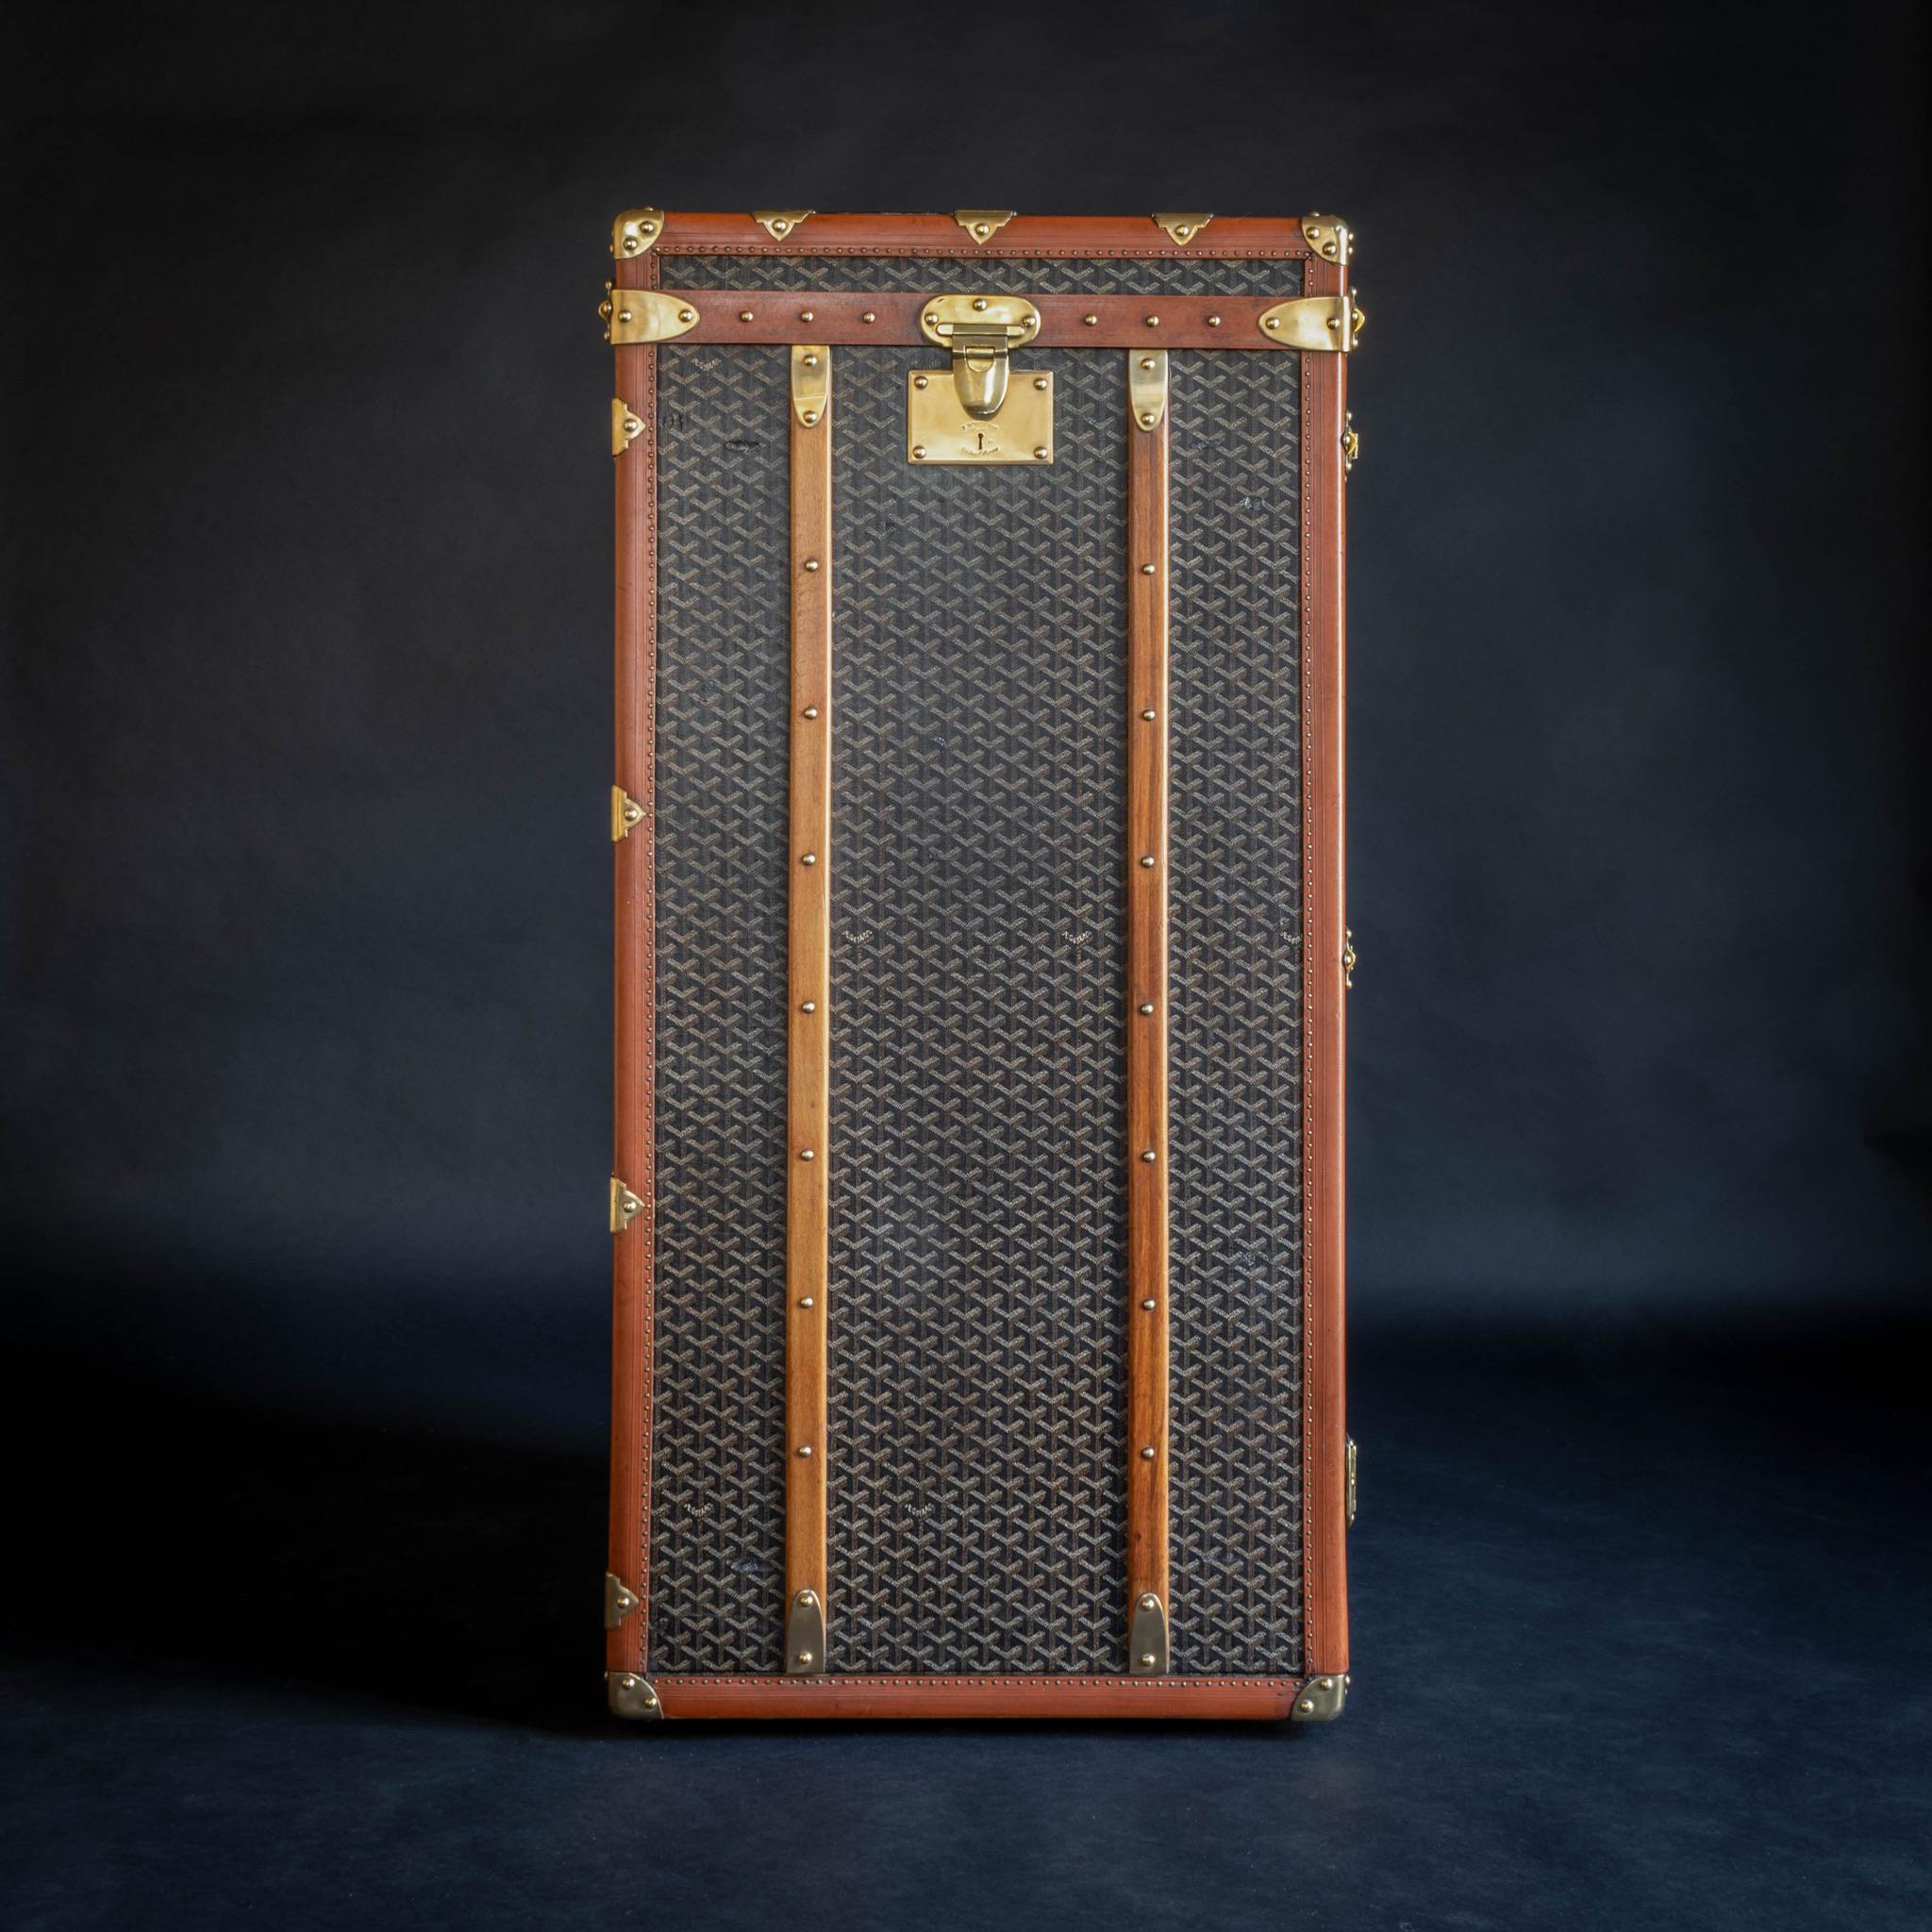 An unusual Goyard wardrobe trunk with original chevron pattern canvas covering, brass fittings and original cotton lined interior providing hanging space. Circa 1920.

The proportion of the trunk means that, if it was laid on it’s back, it would